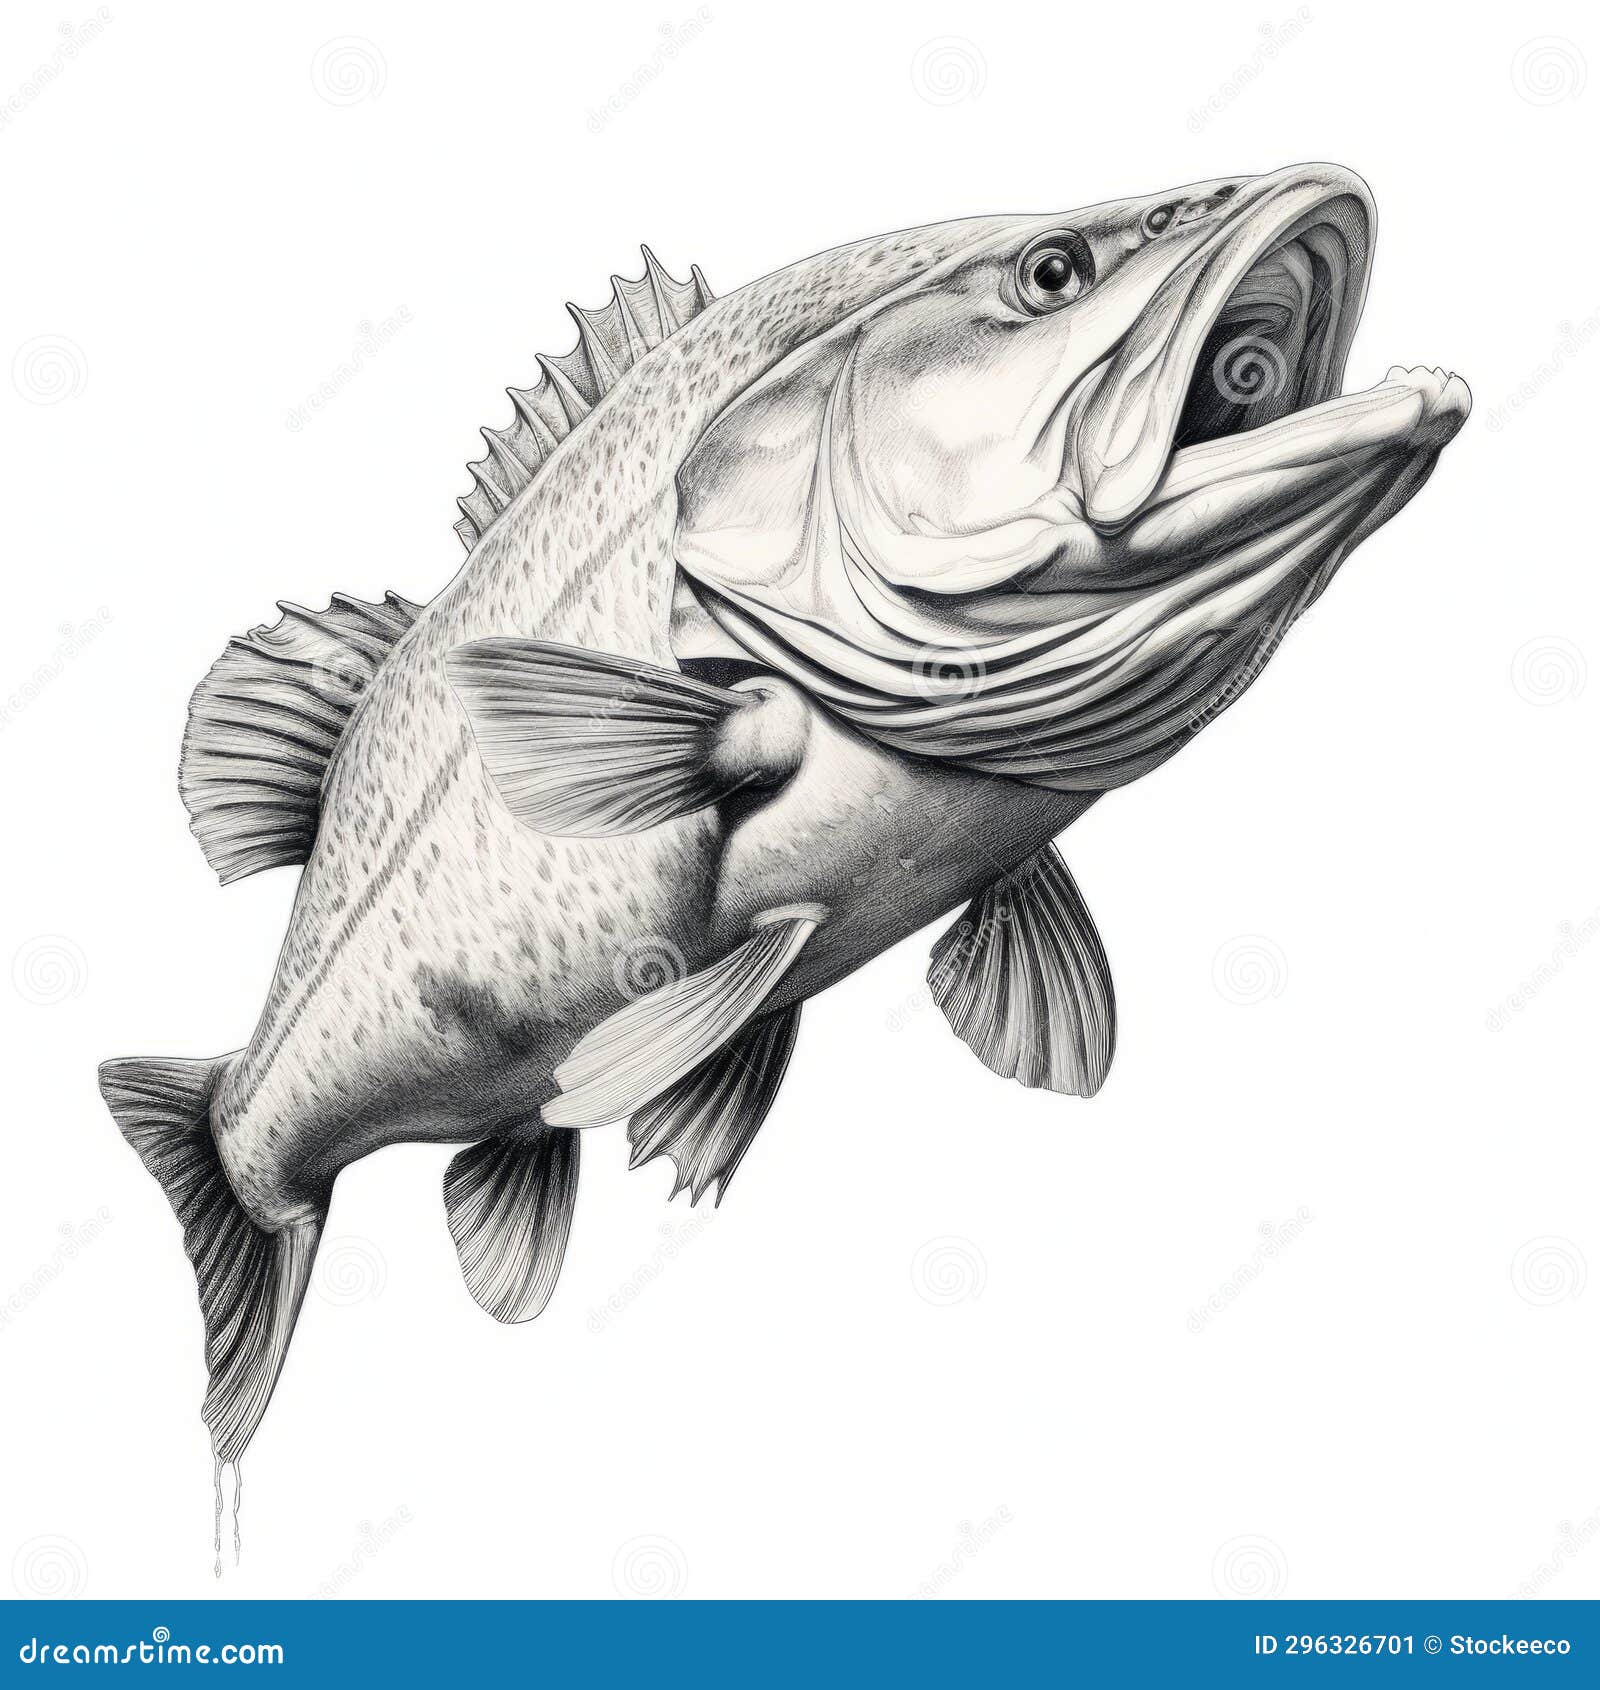 Photorealistic Black and White Bass Drawing with Open Mouth Stock